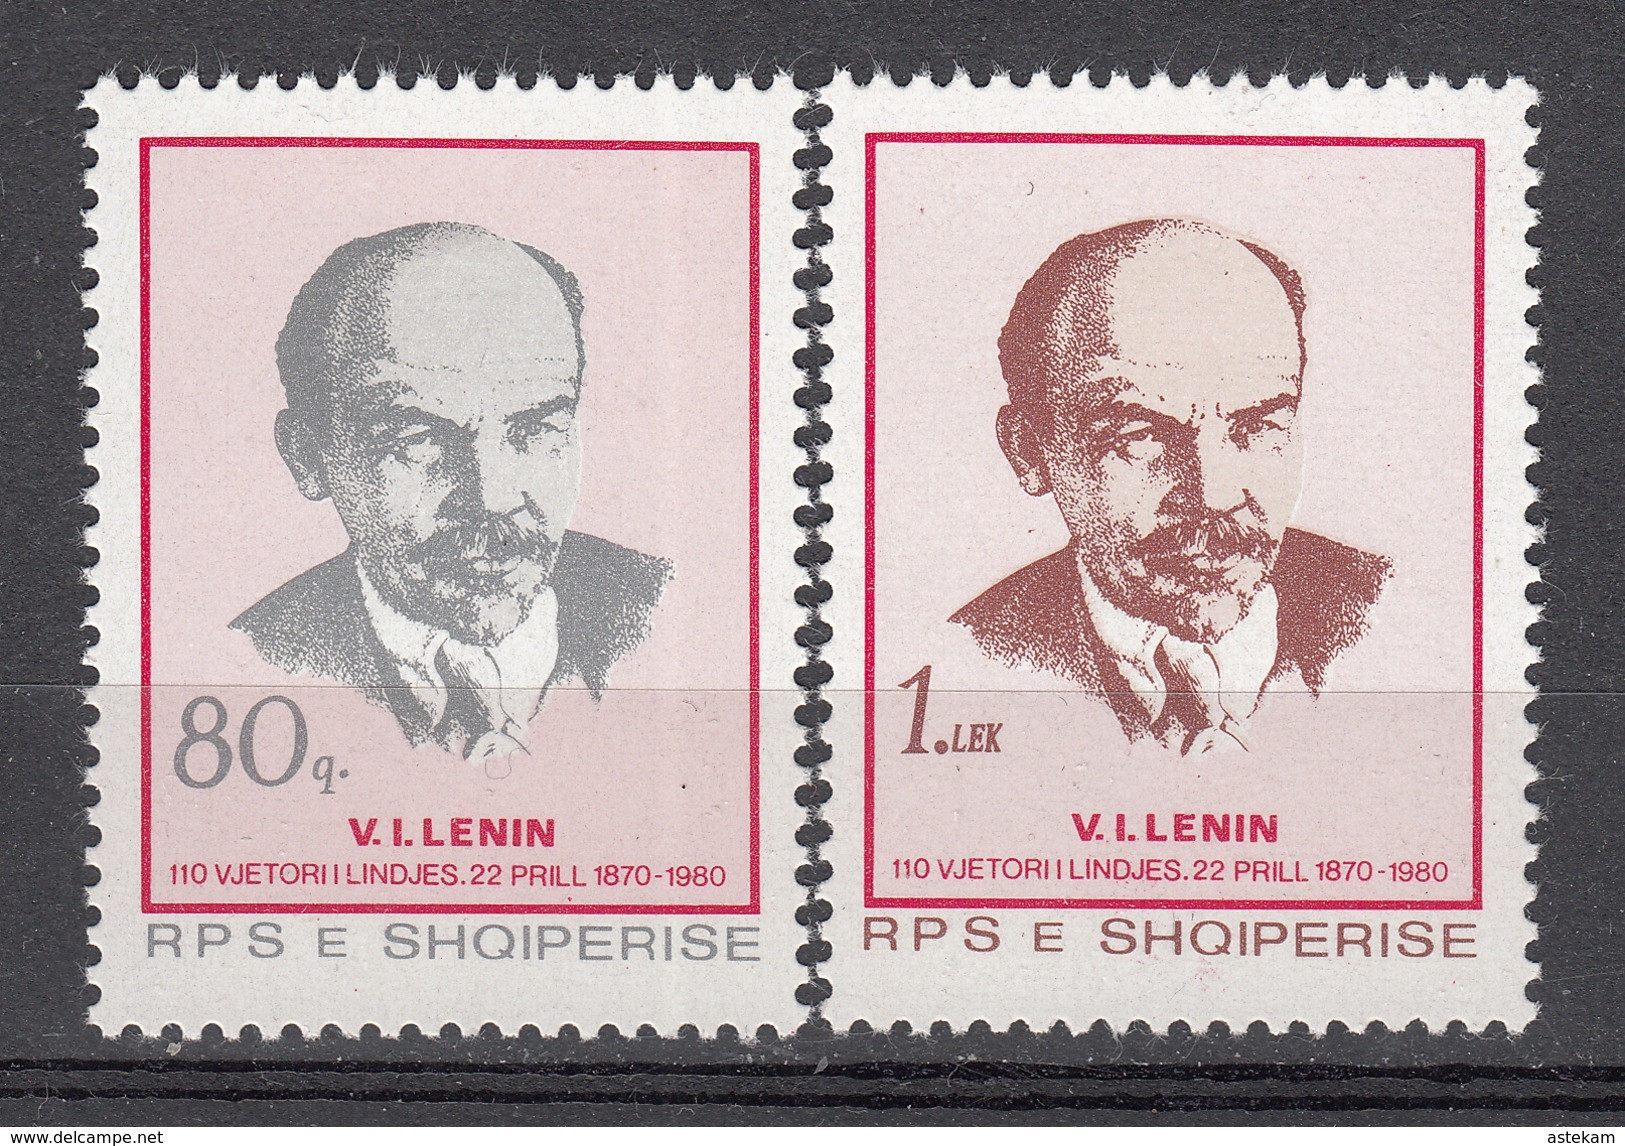 ALBANIA 1980, 110th ANNIVERSARY Of LENIN, COMPLETE, MNH SERIES With GOOD QUALITY, *** - Lénine